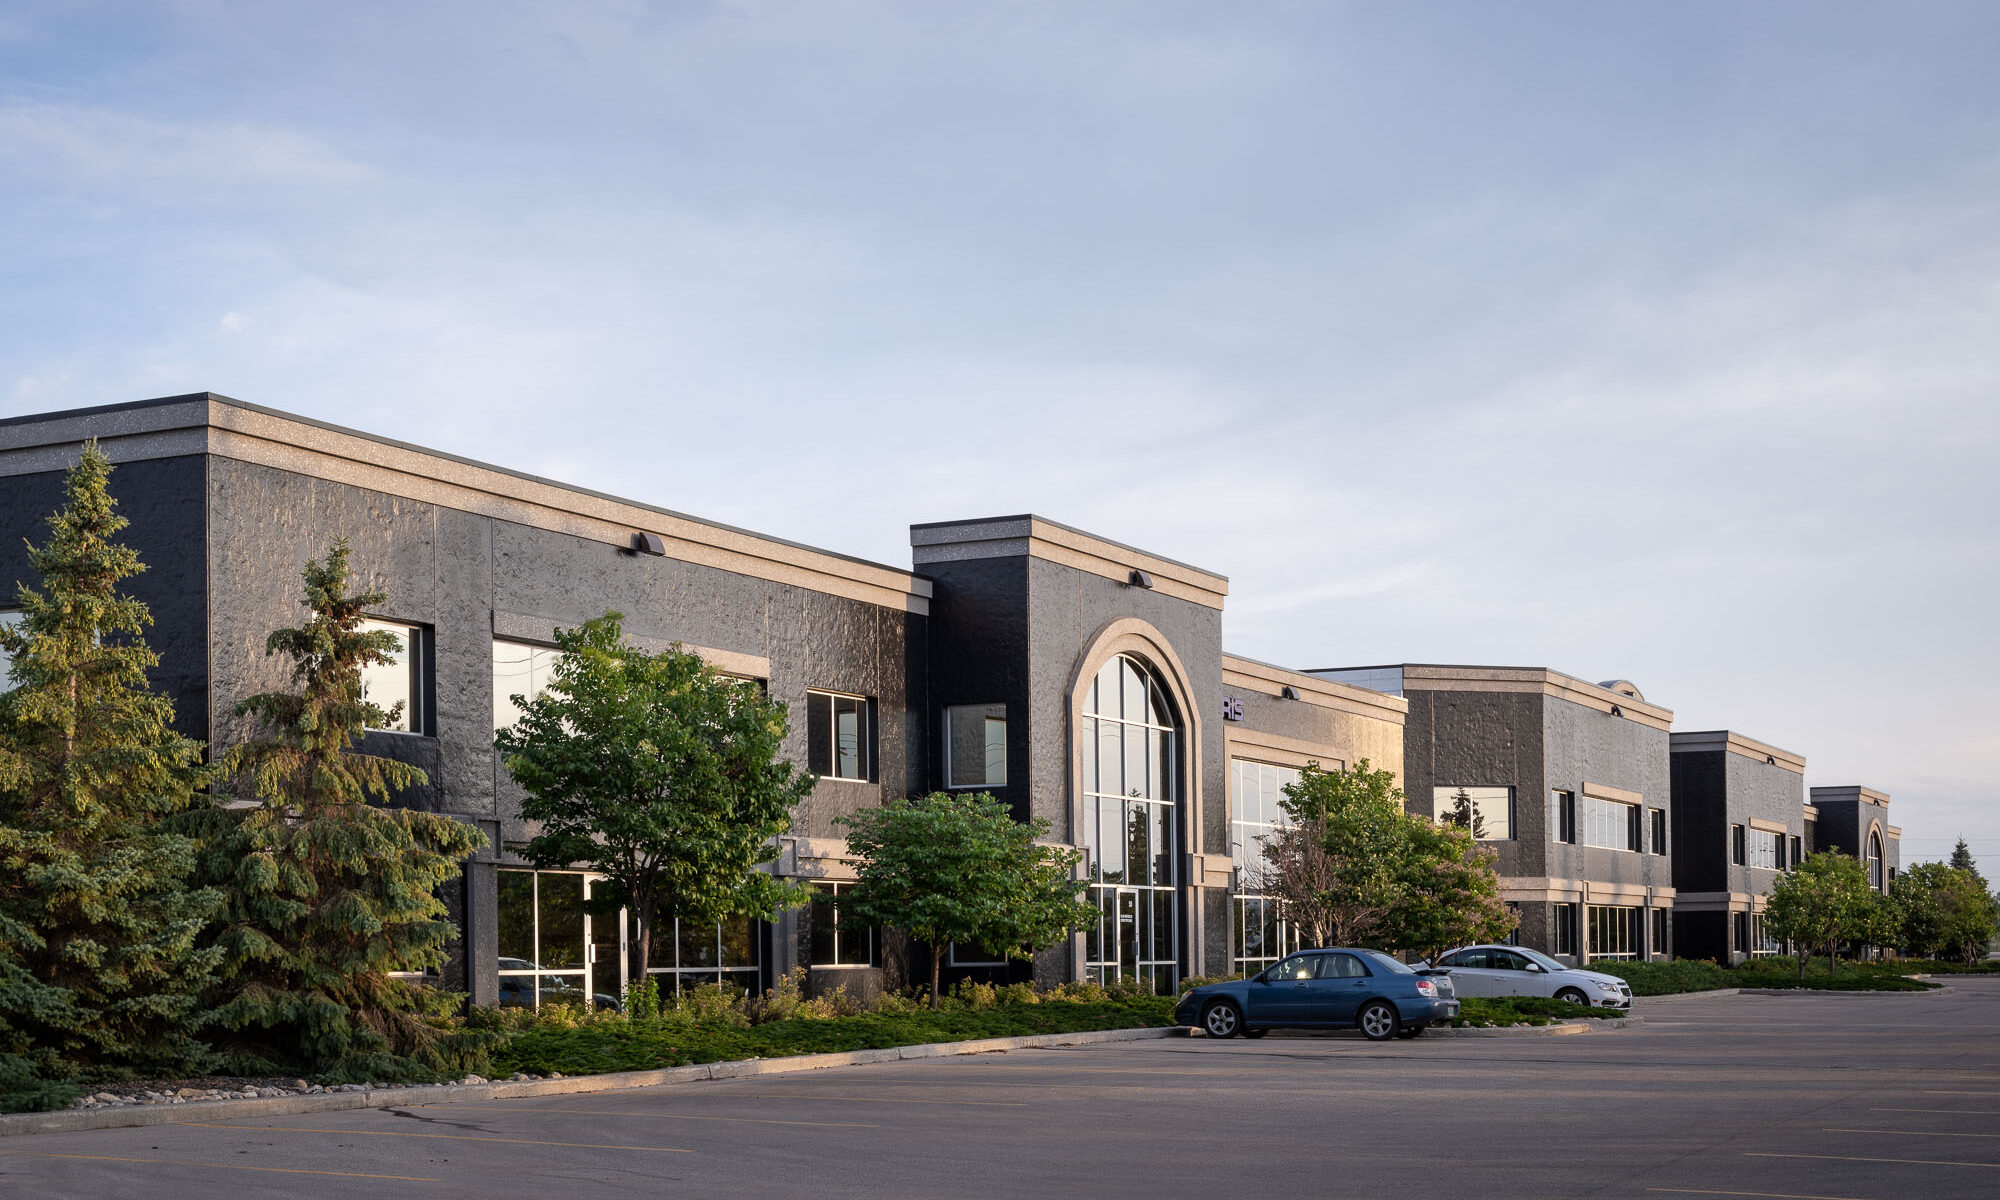 The Waters Business Park | Commercial Real Estate For Lease | Terracon Development